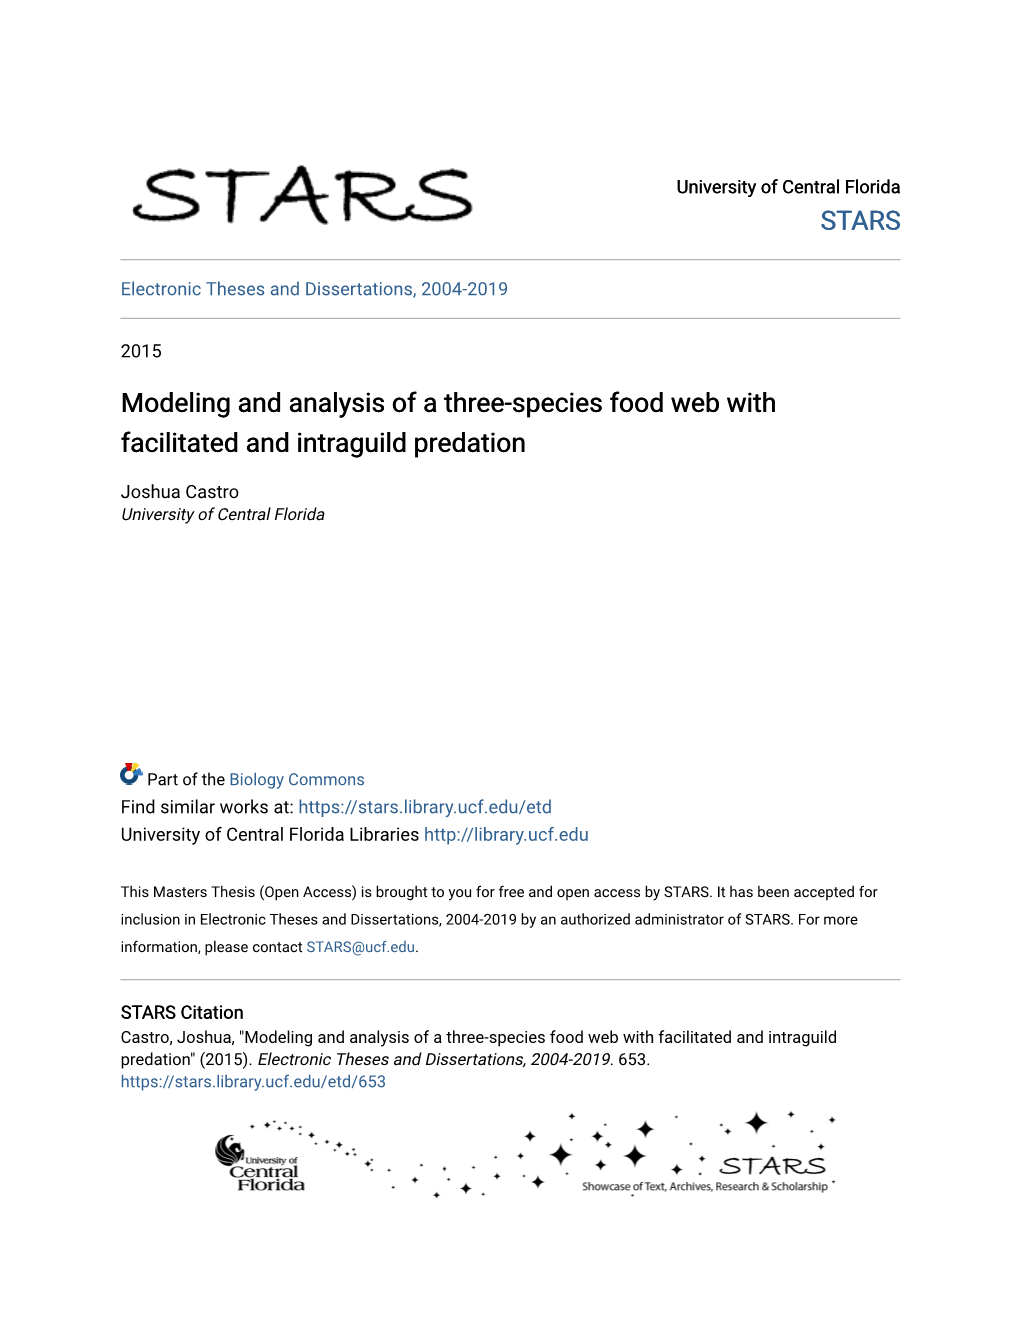 Modeling and Analysis of a Three-Species Food Web with Facilitated and Intraguild Predation